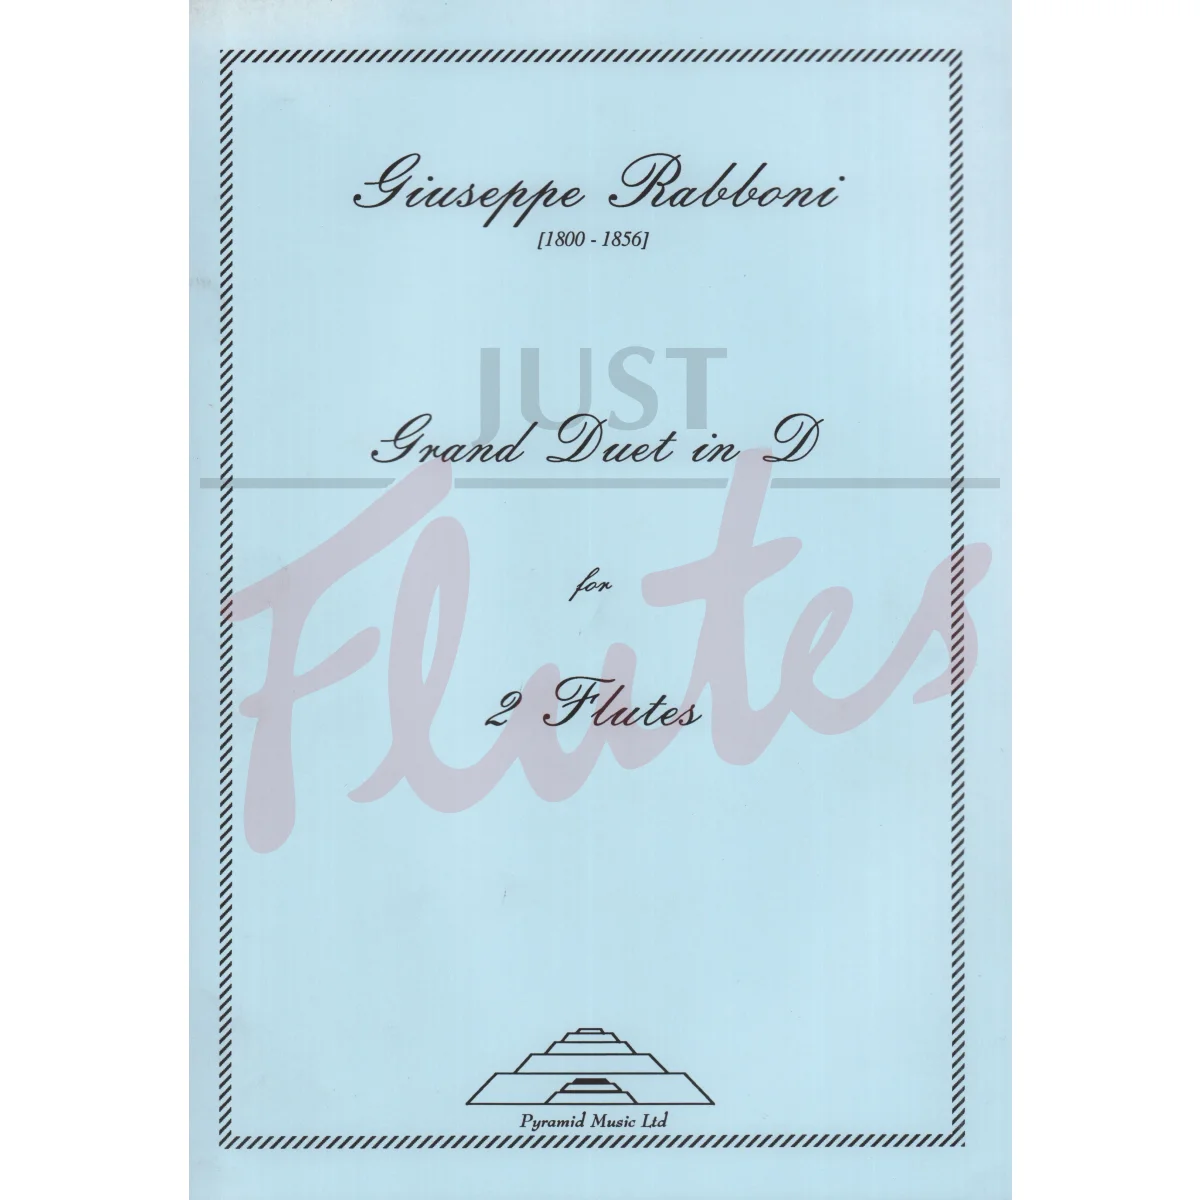 Grand Duet in D for Two Flutes